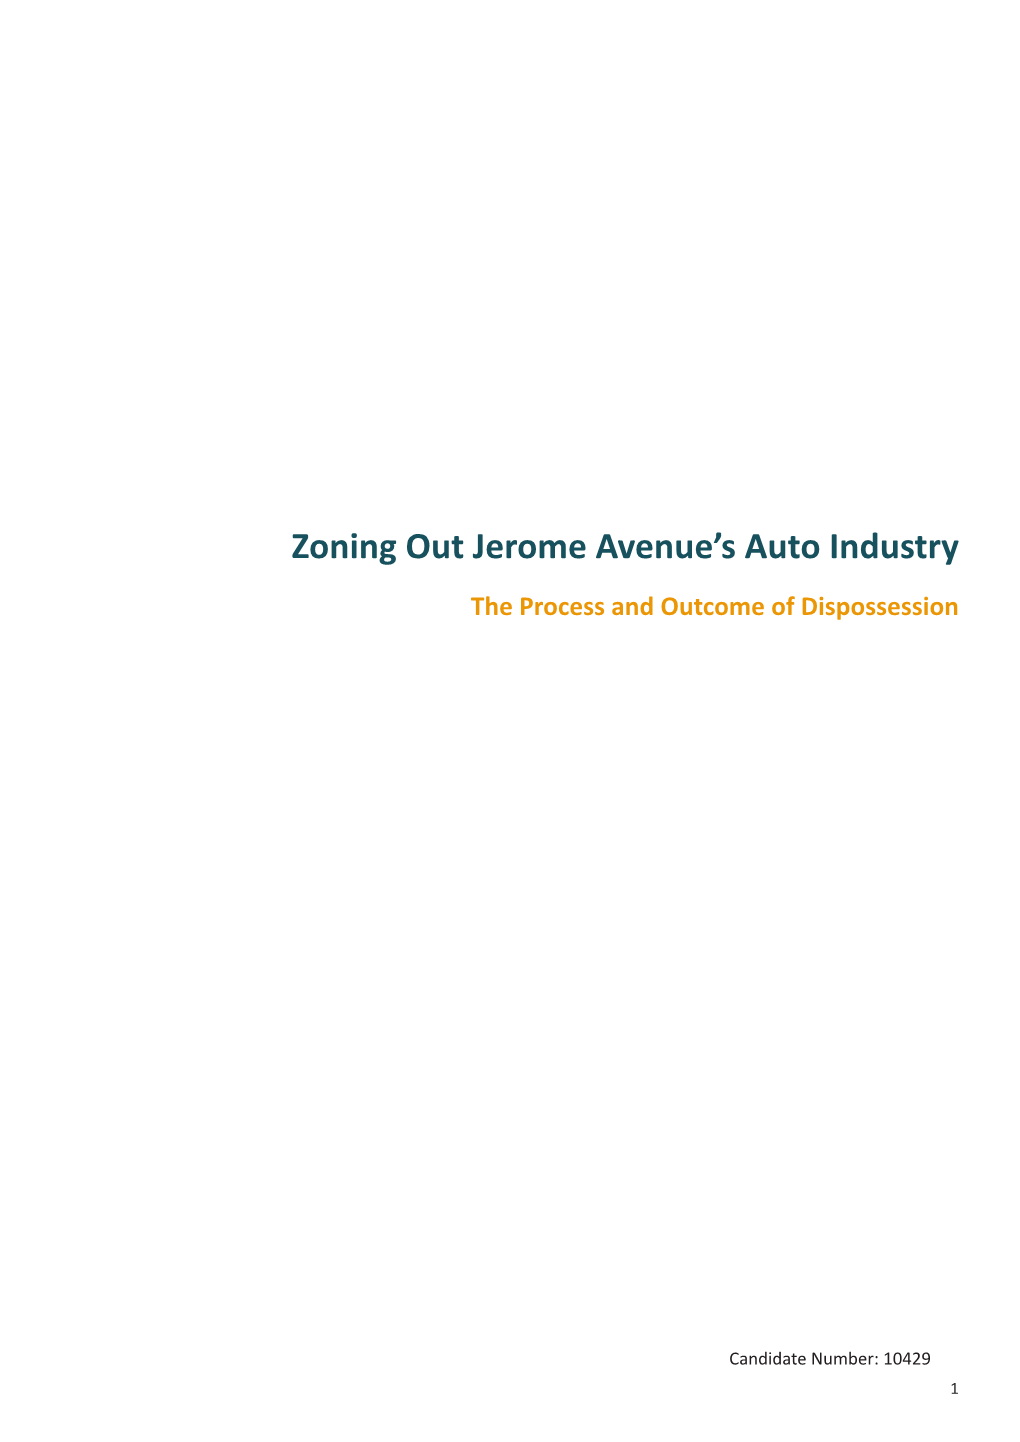 Zoning out Jerome Avenue's Auto Industry